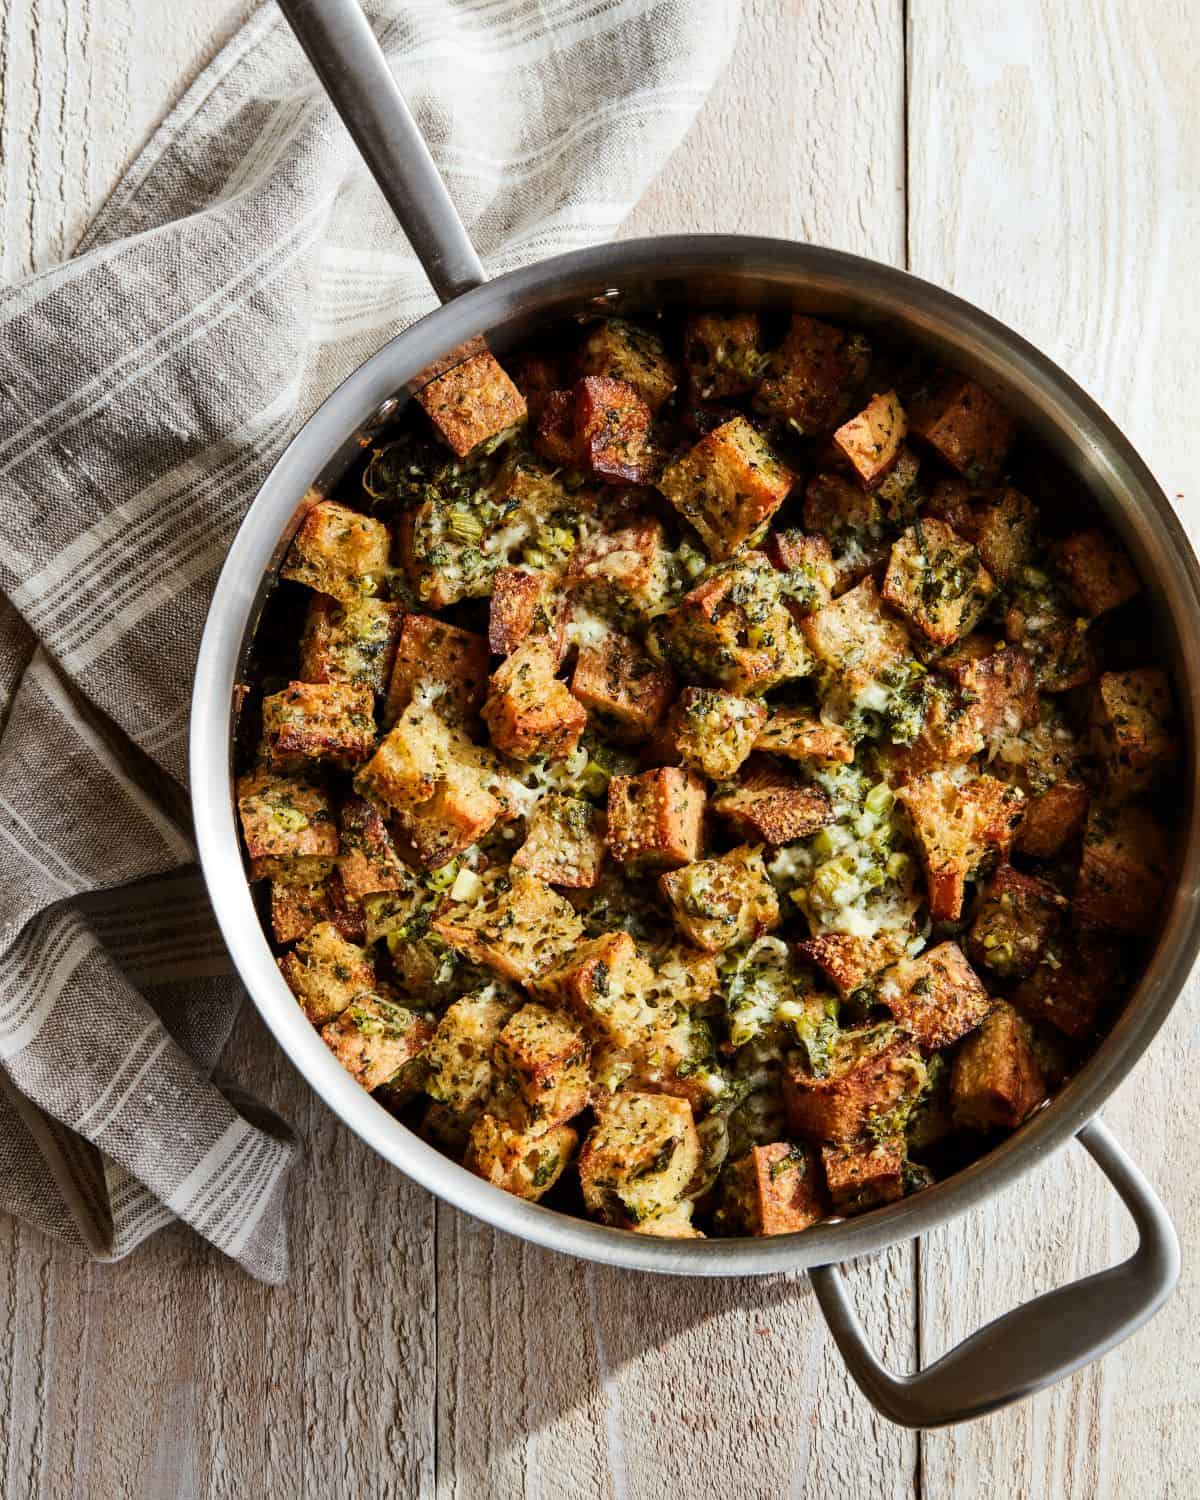 A steel skillet with rustic herb stuffing, baked and browned on top, placed on a grey and white kitchen towel.